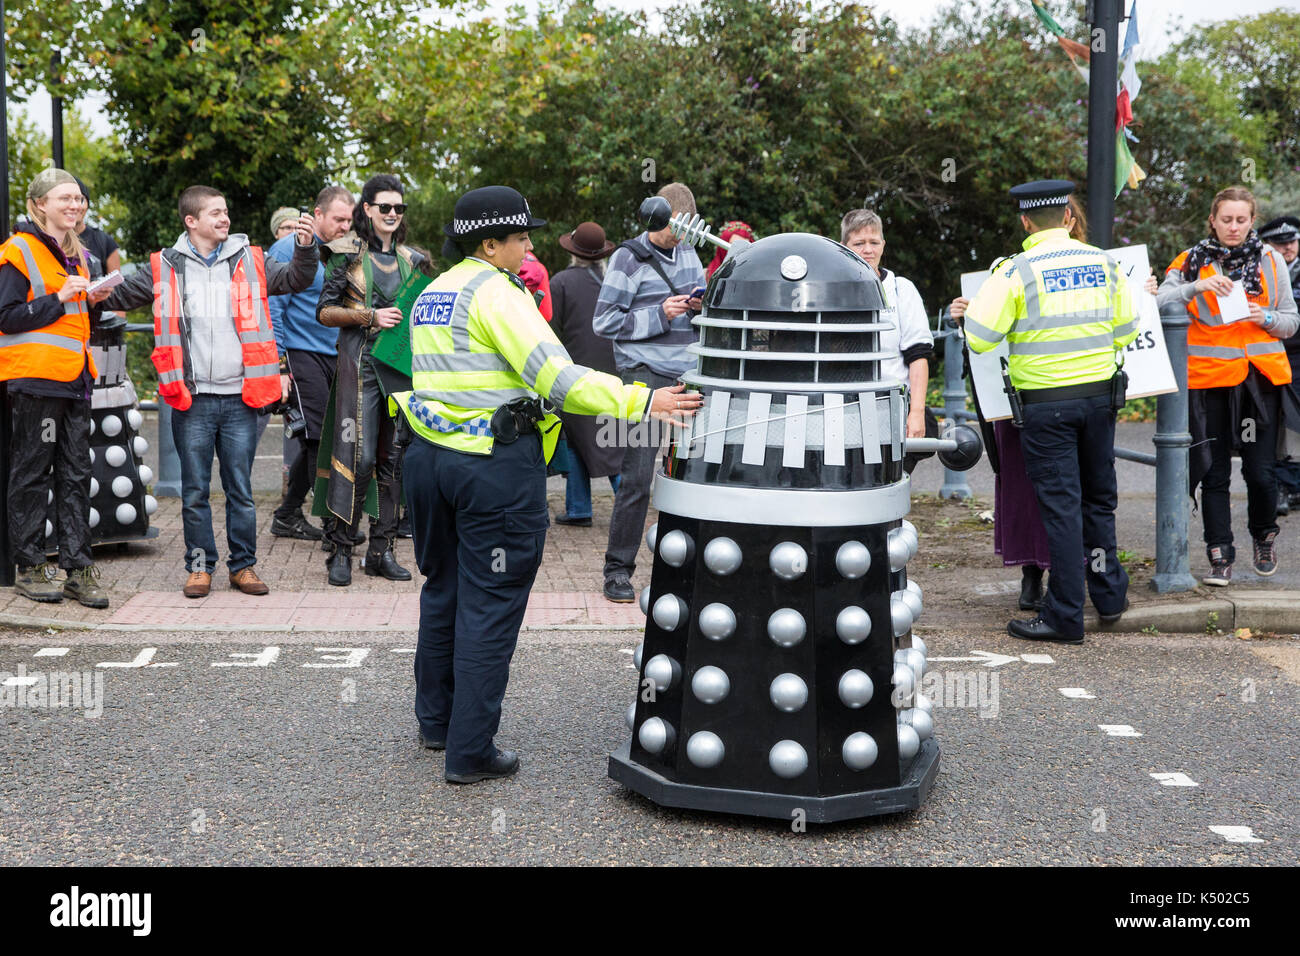 London, UK. 8th Sep, 2017. A police officer asks a Dalek to clear the road during a protest by super villains against the DSEI arms fair to be held at the ExCel Centre next week. DSEI is one of the world's largest arms fairs and military delegations from states believed to be responsible for widespread abuses of human rights are expected to attend. Credit: Mark Kerrison/Alamy Live News Stock Photo